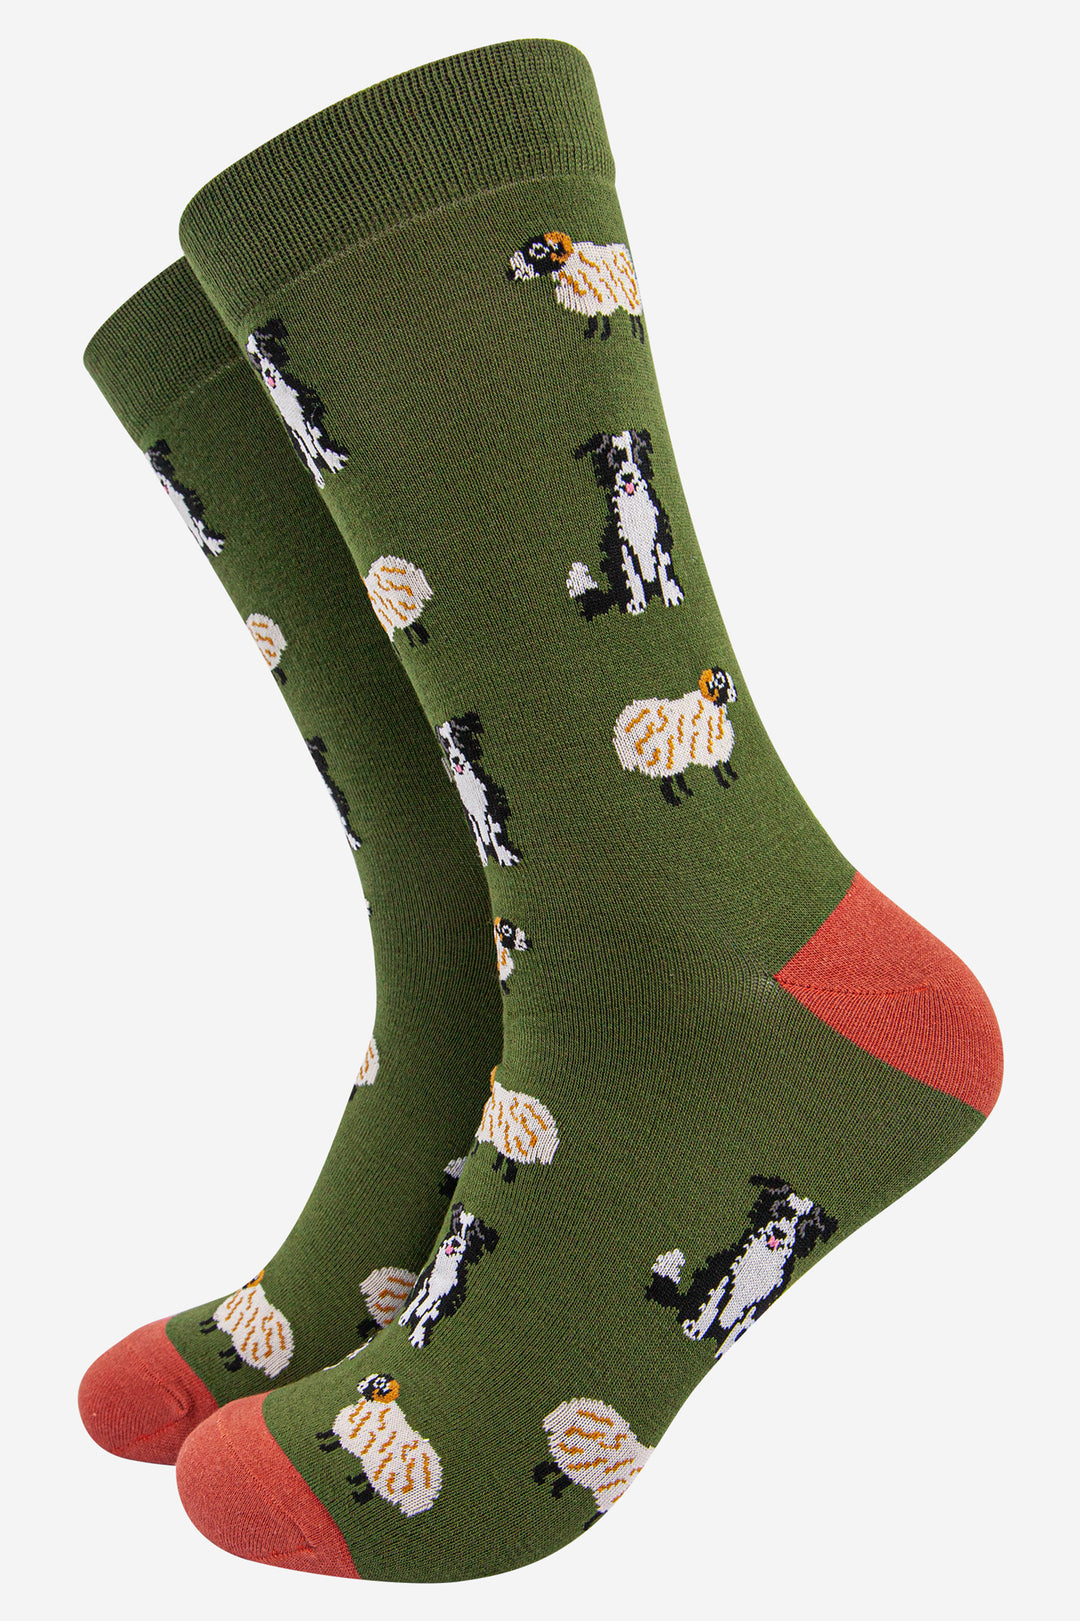 dark green socks with an orange heel and toe with an all over pattern of black and white border collie dogs and sheep